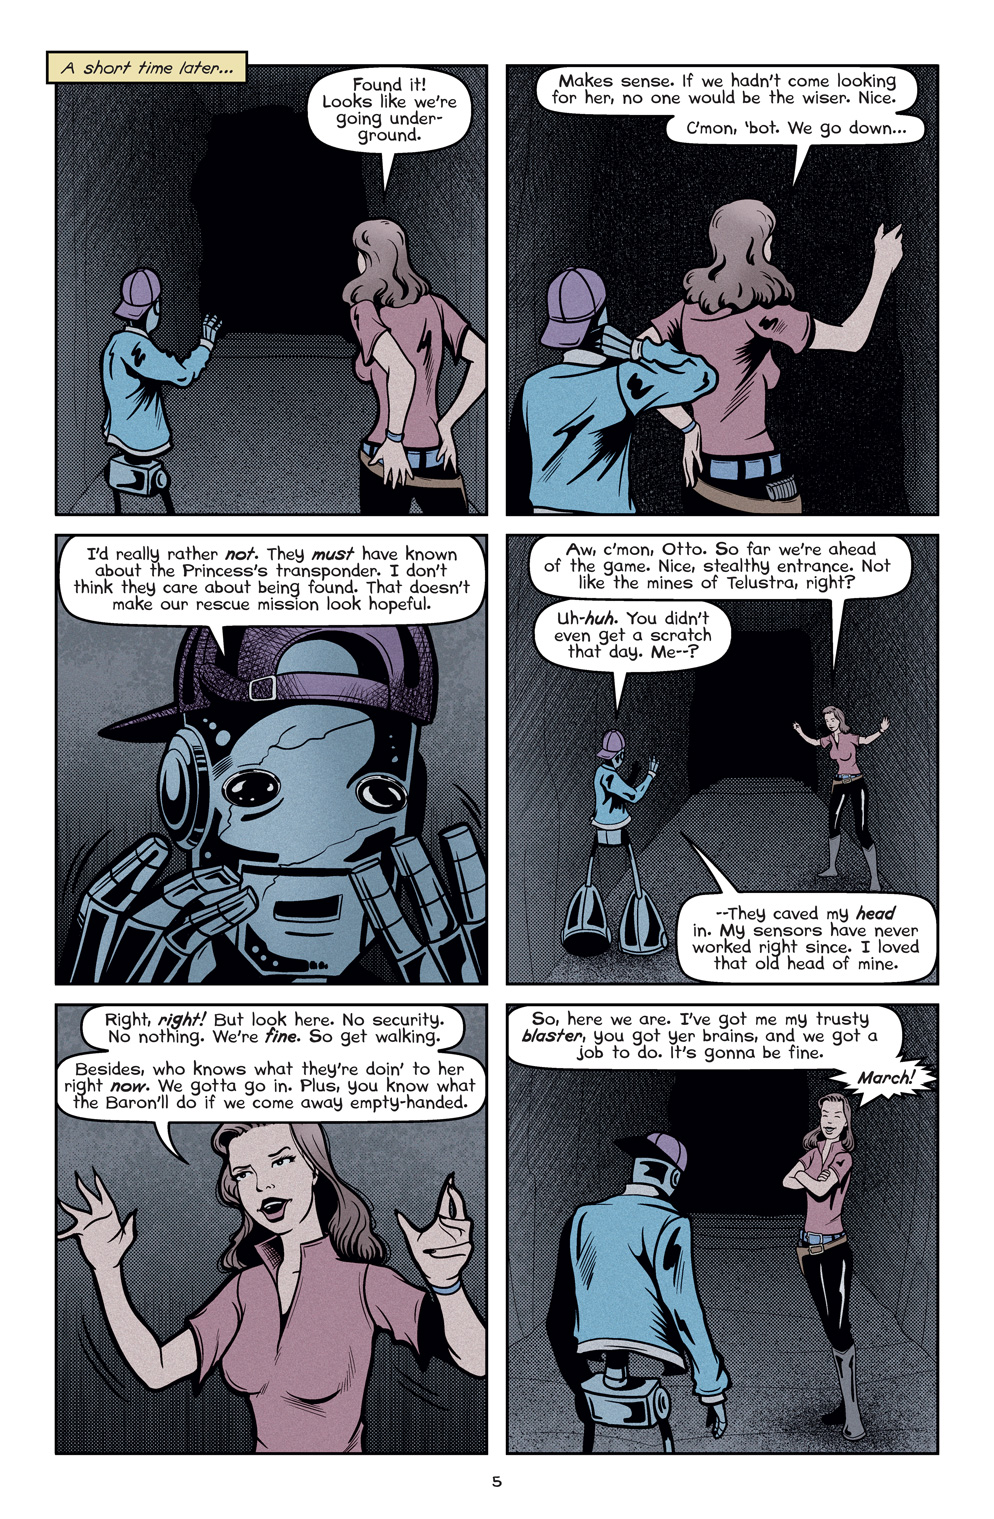 Page 5 of the short comic book story 'Sheba the Great' written and illustrated by Von Allan